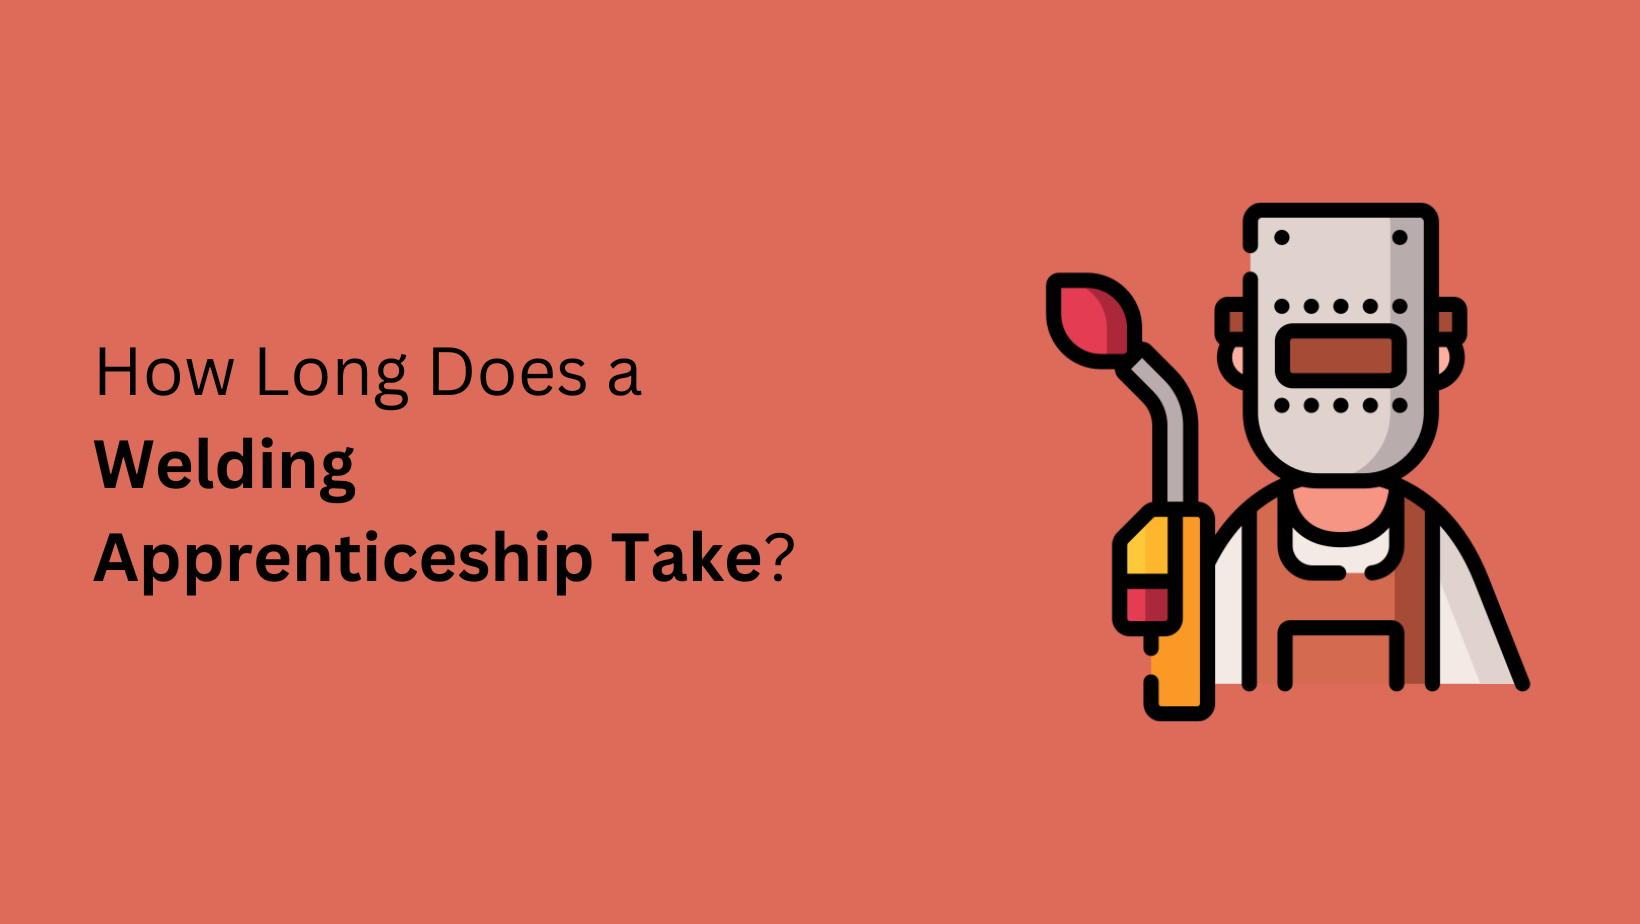 How Long Does a Welding Apprenticeship Take